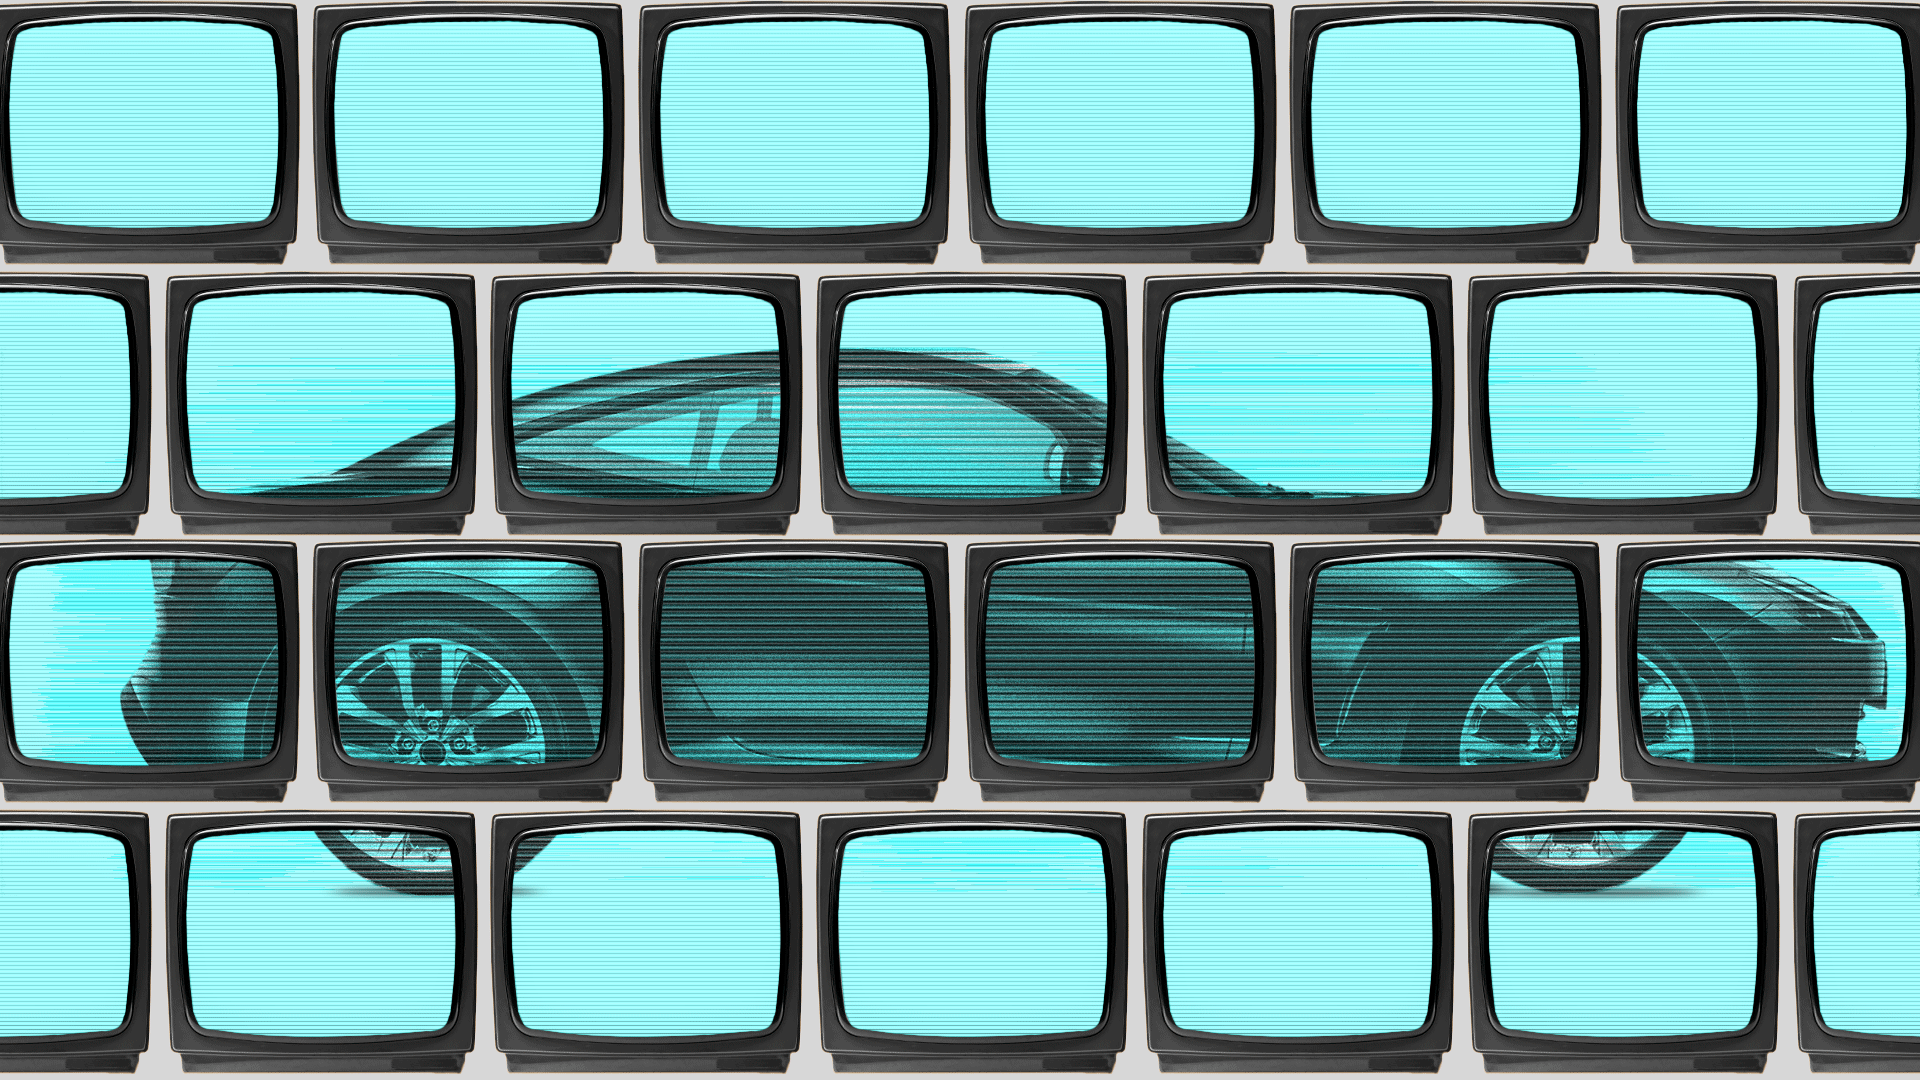 Illustration of a wall of televisions showing footage of a car.